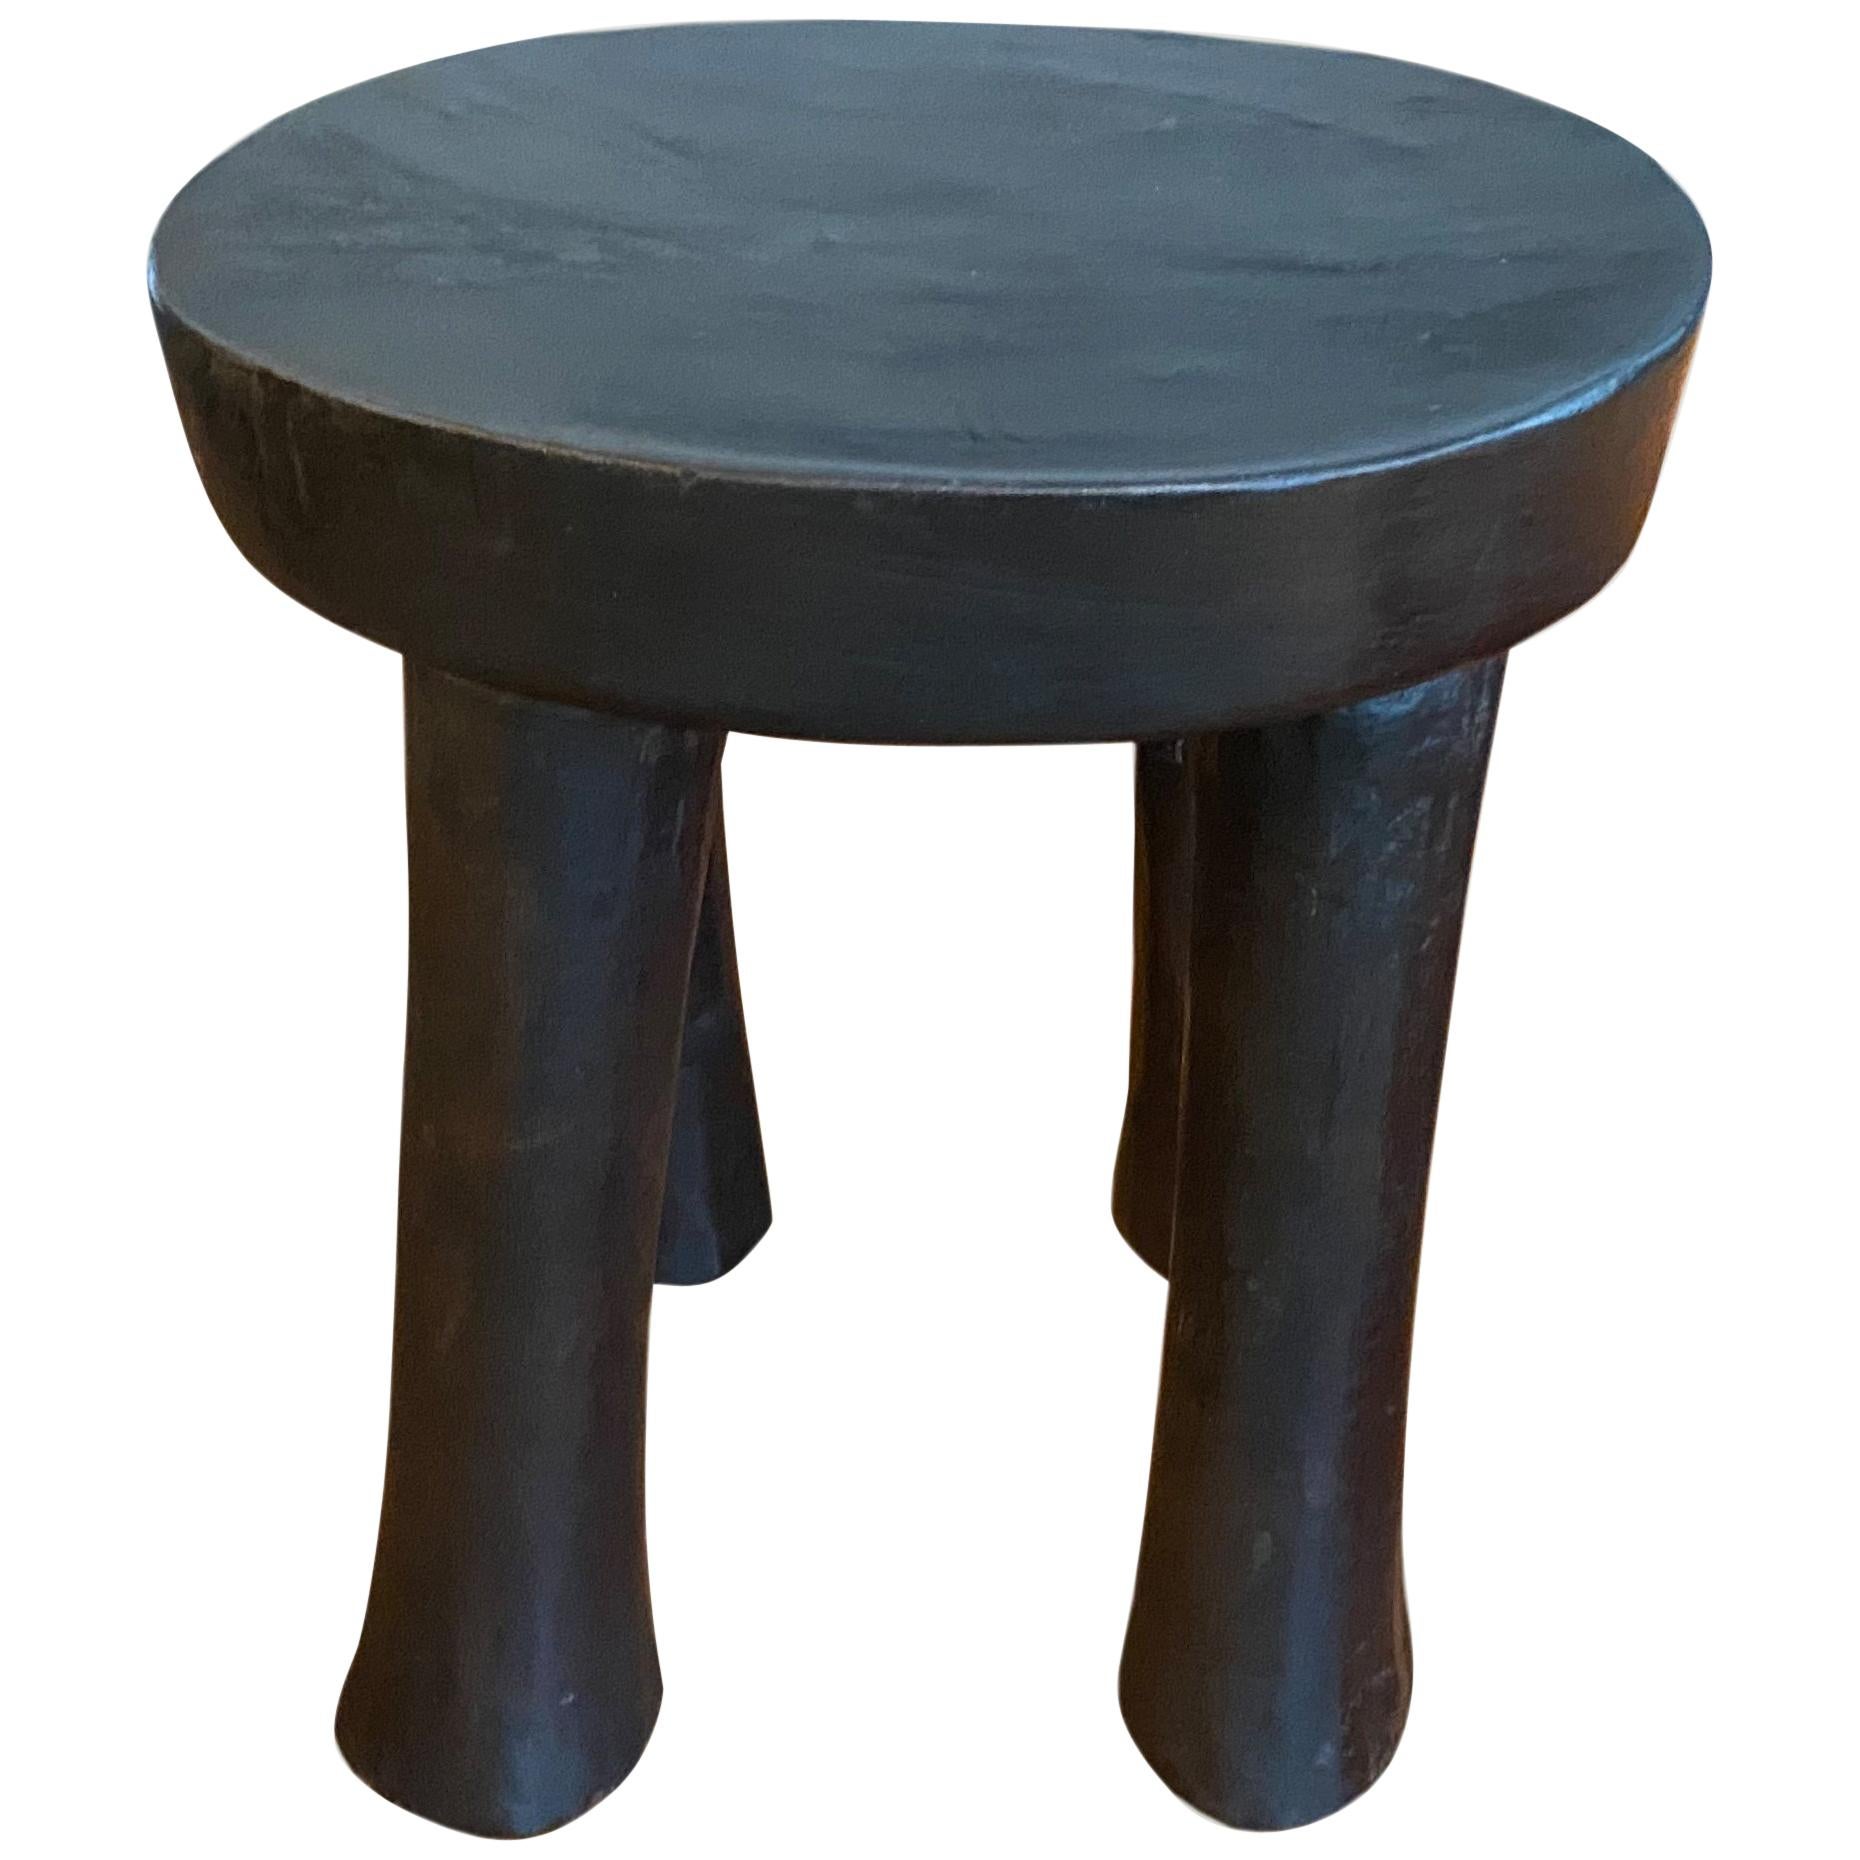 Andrianna Shamaris Antique African Stool or Side Table